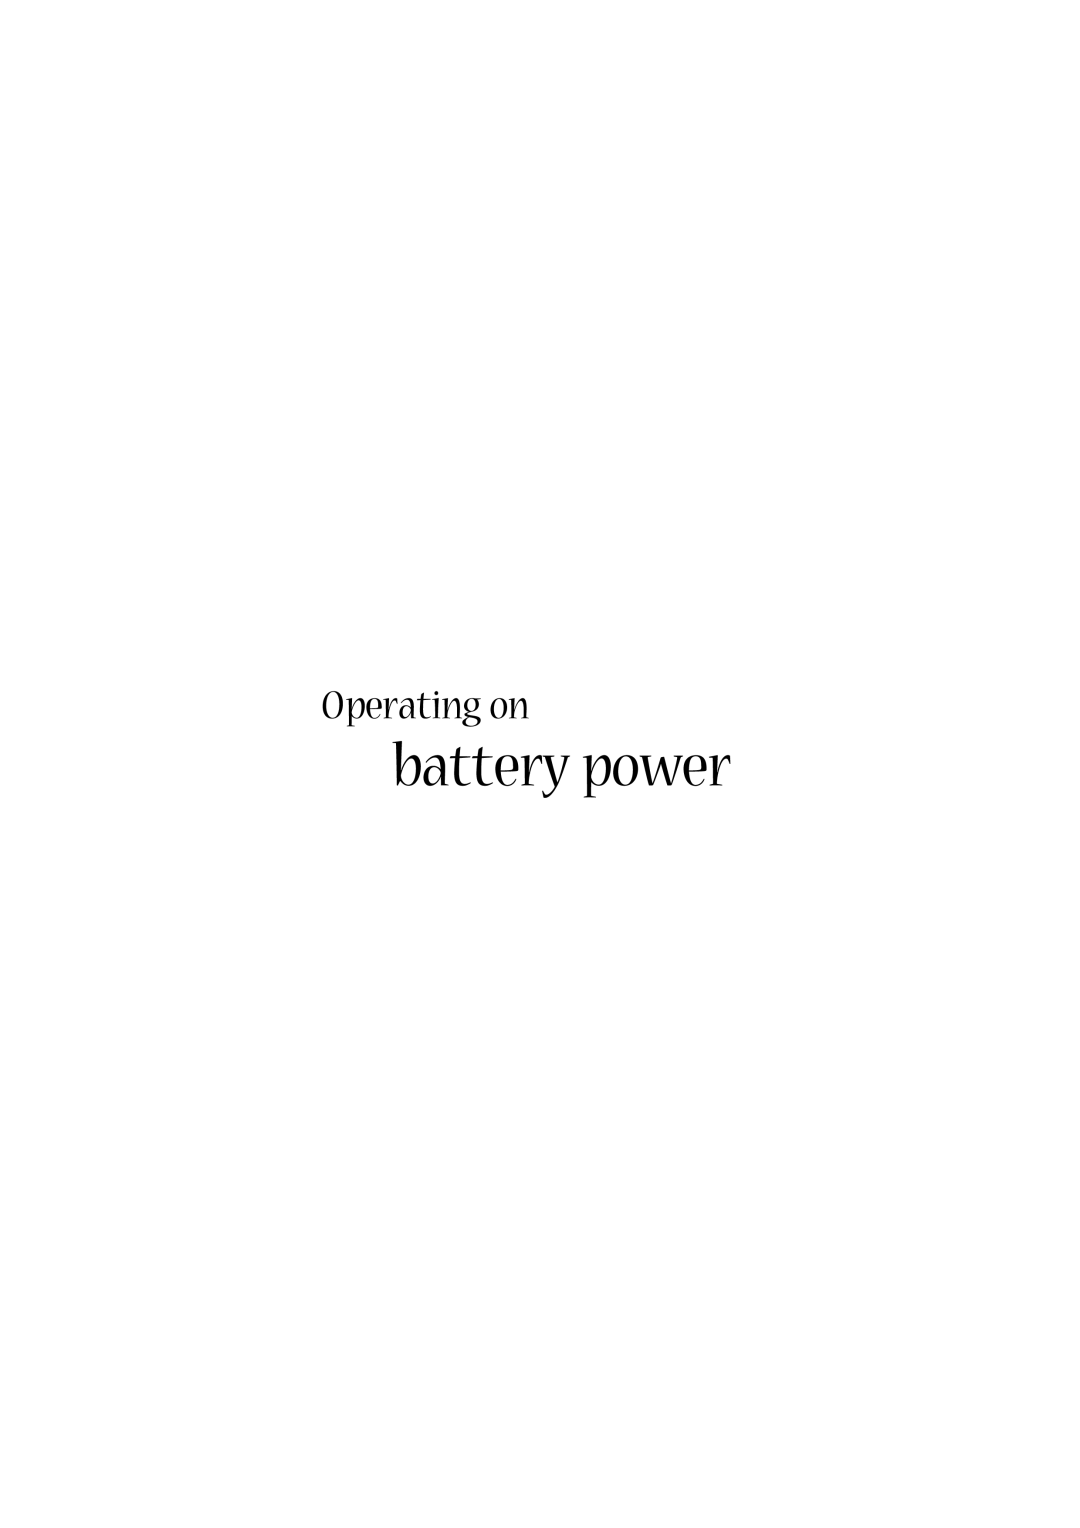 Acer Aspire 1350 manual battery power, Operating on 